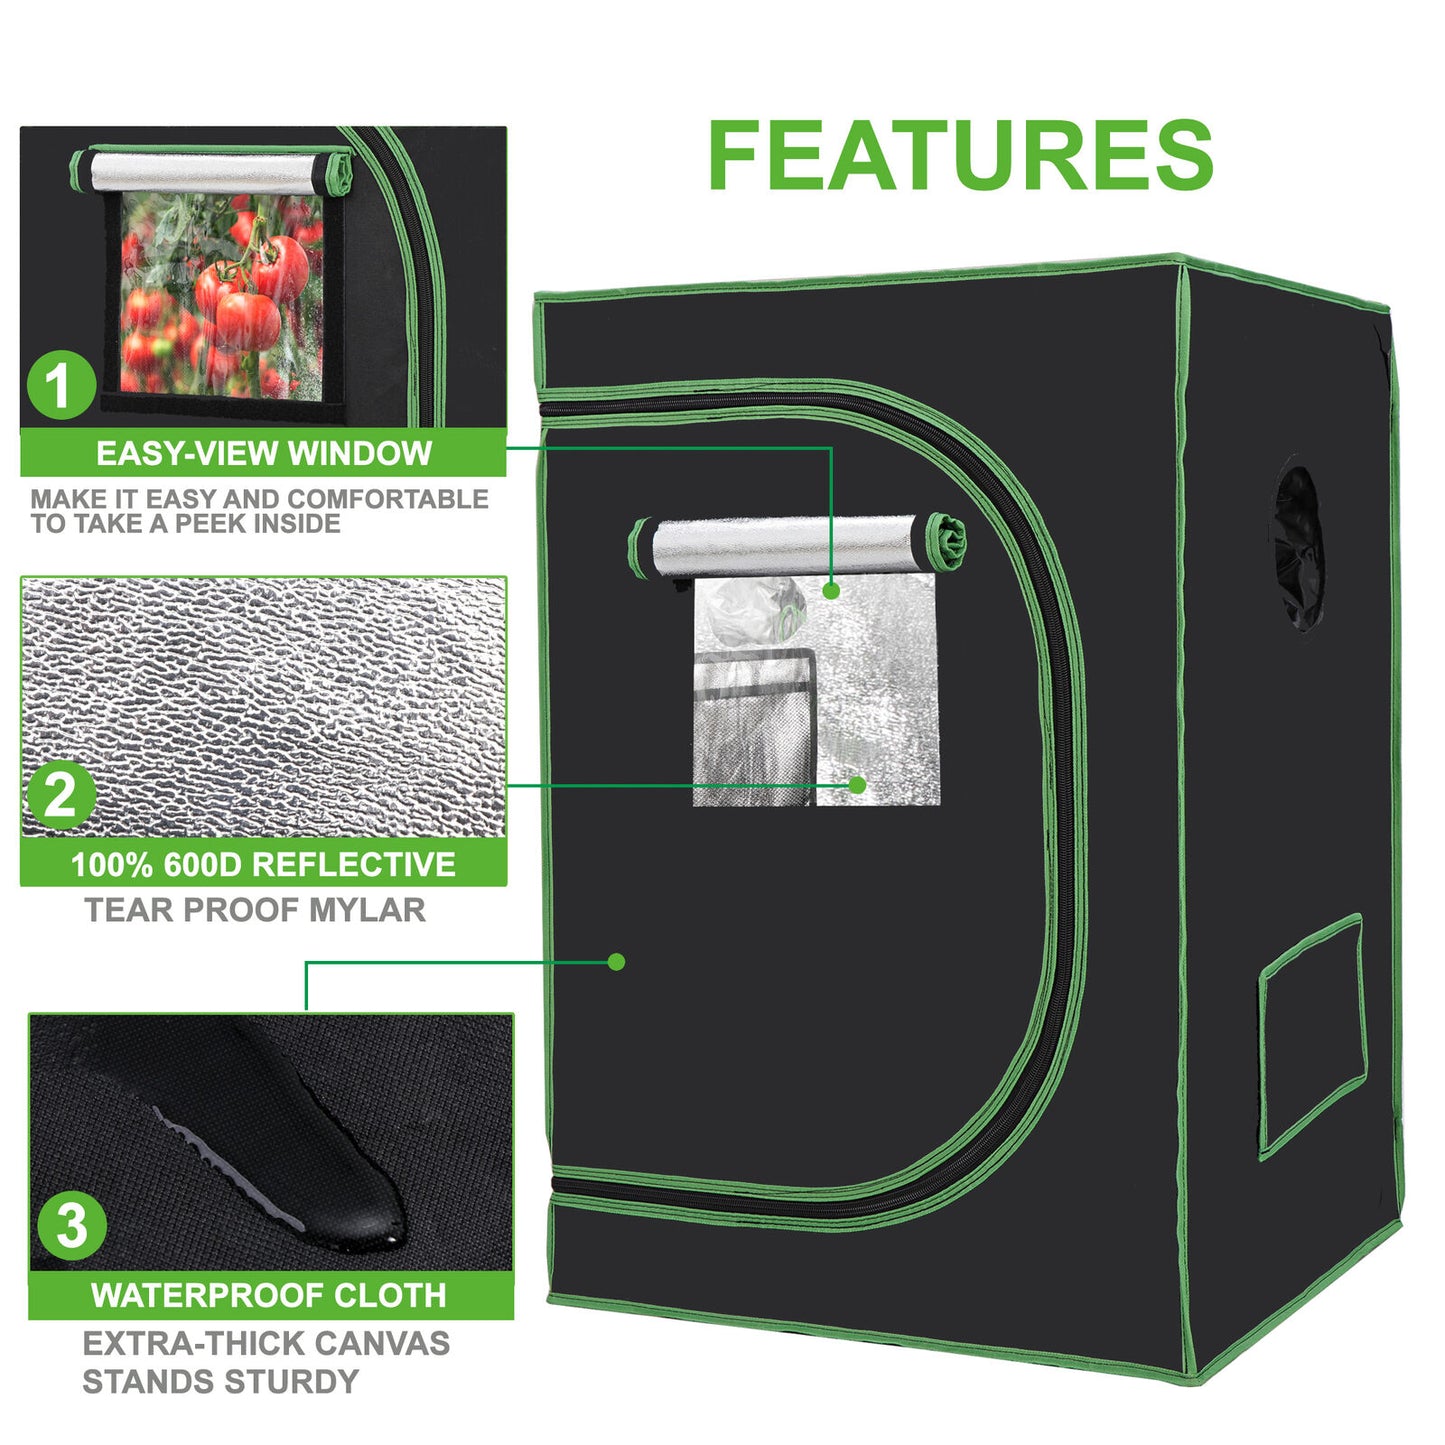 24""x24""x36" Indoor Hydroponic Grow Tent with Observation Window and Floor Tray